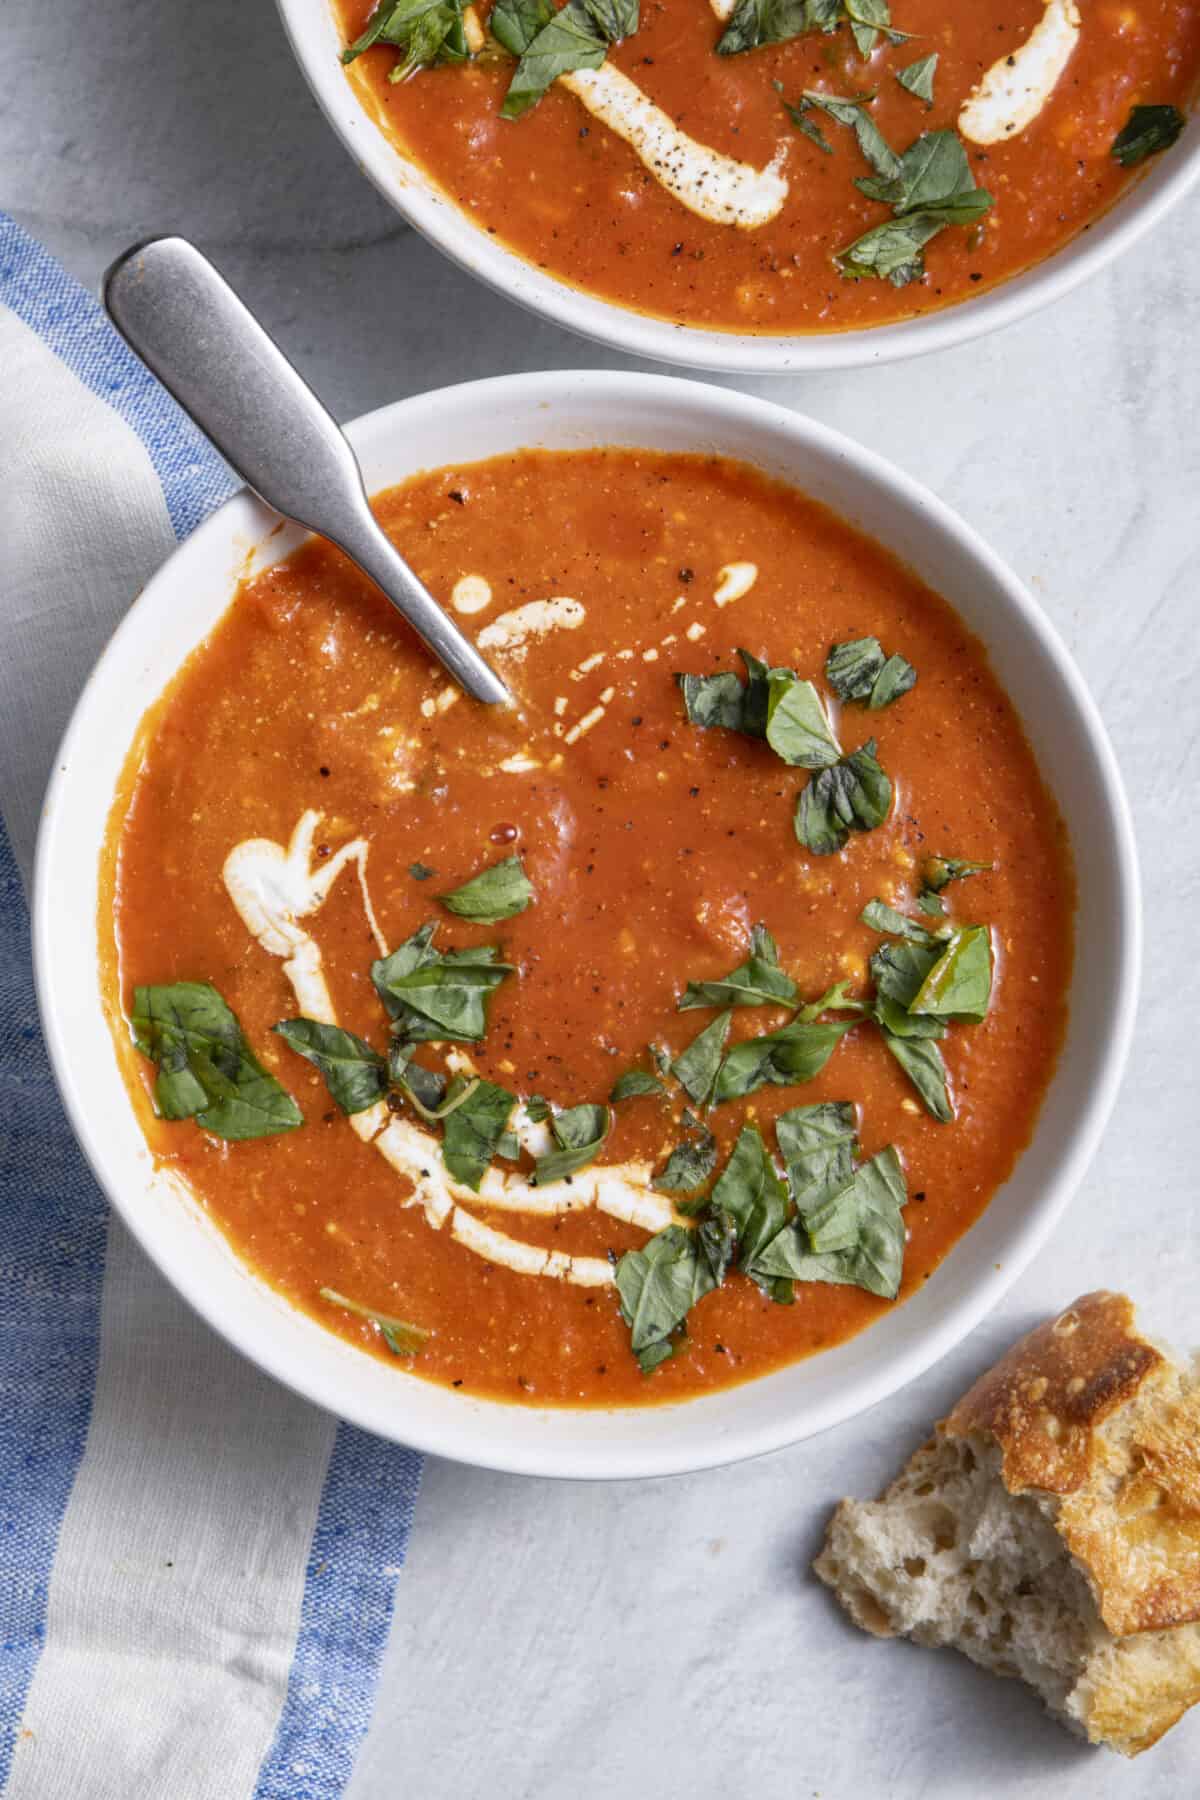 Roasted red pepper soup bowl with baguette next to it